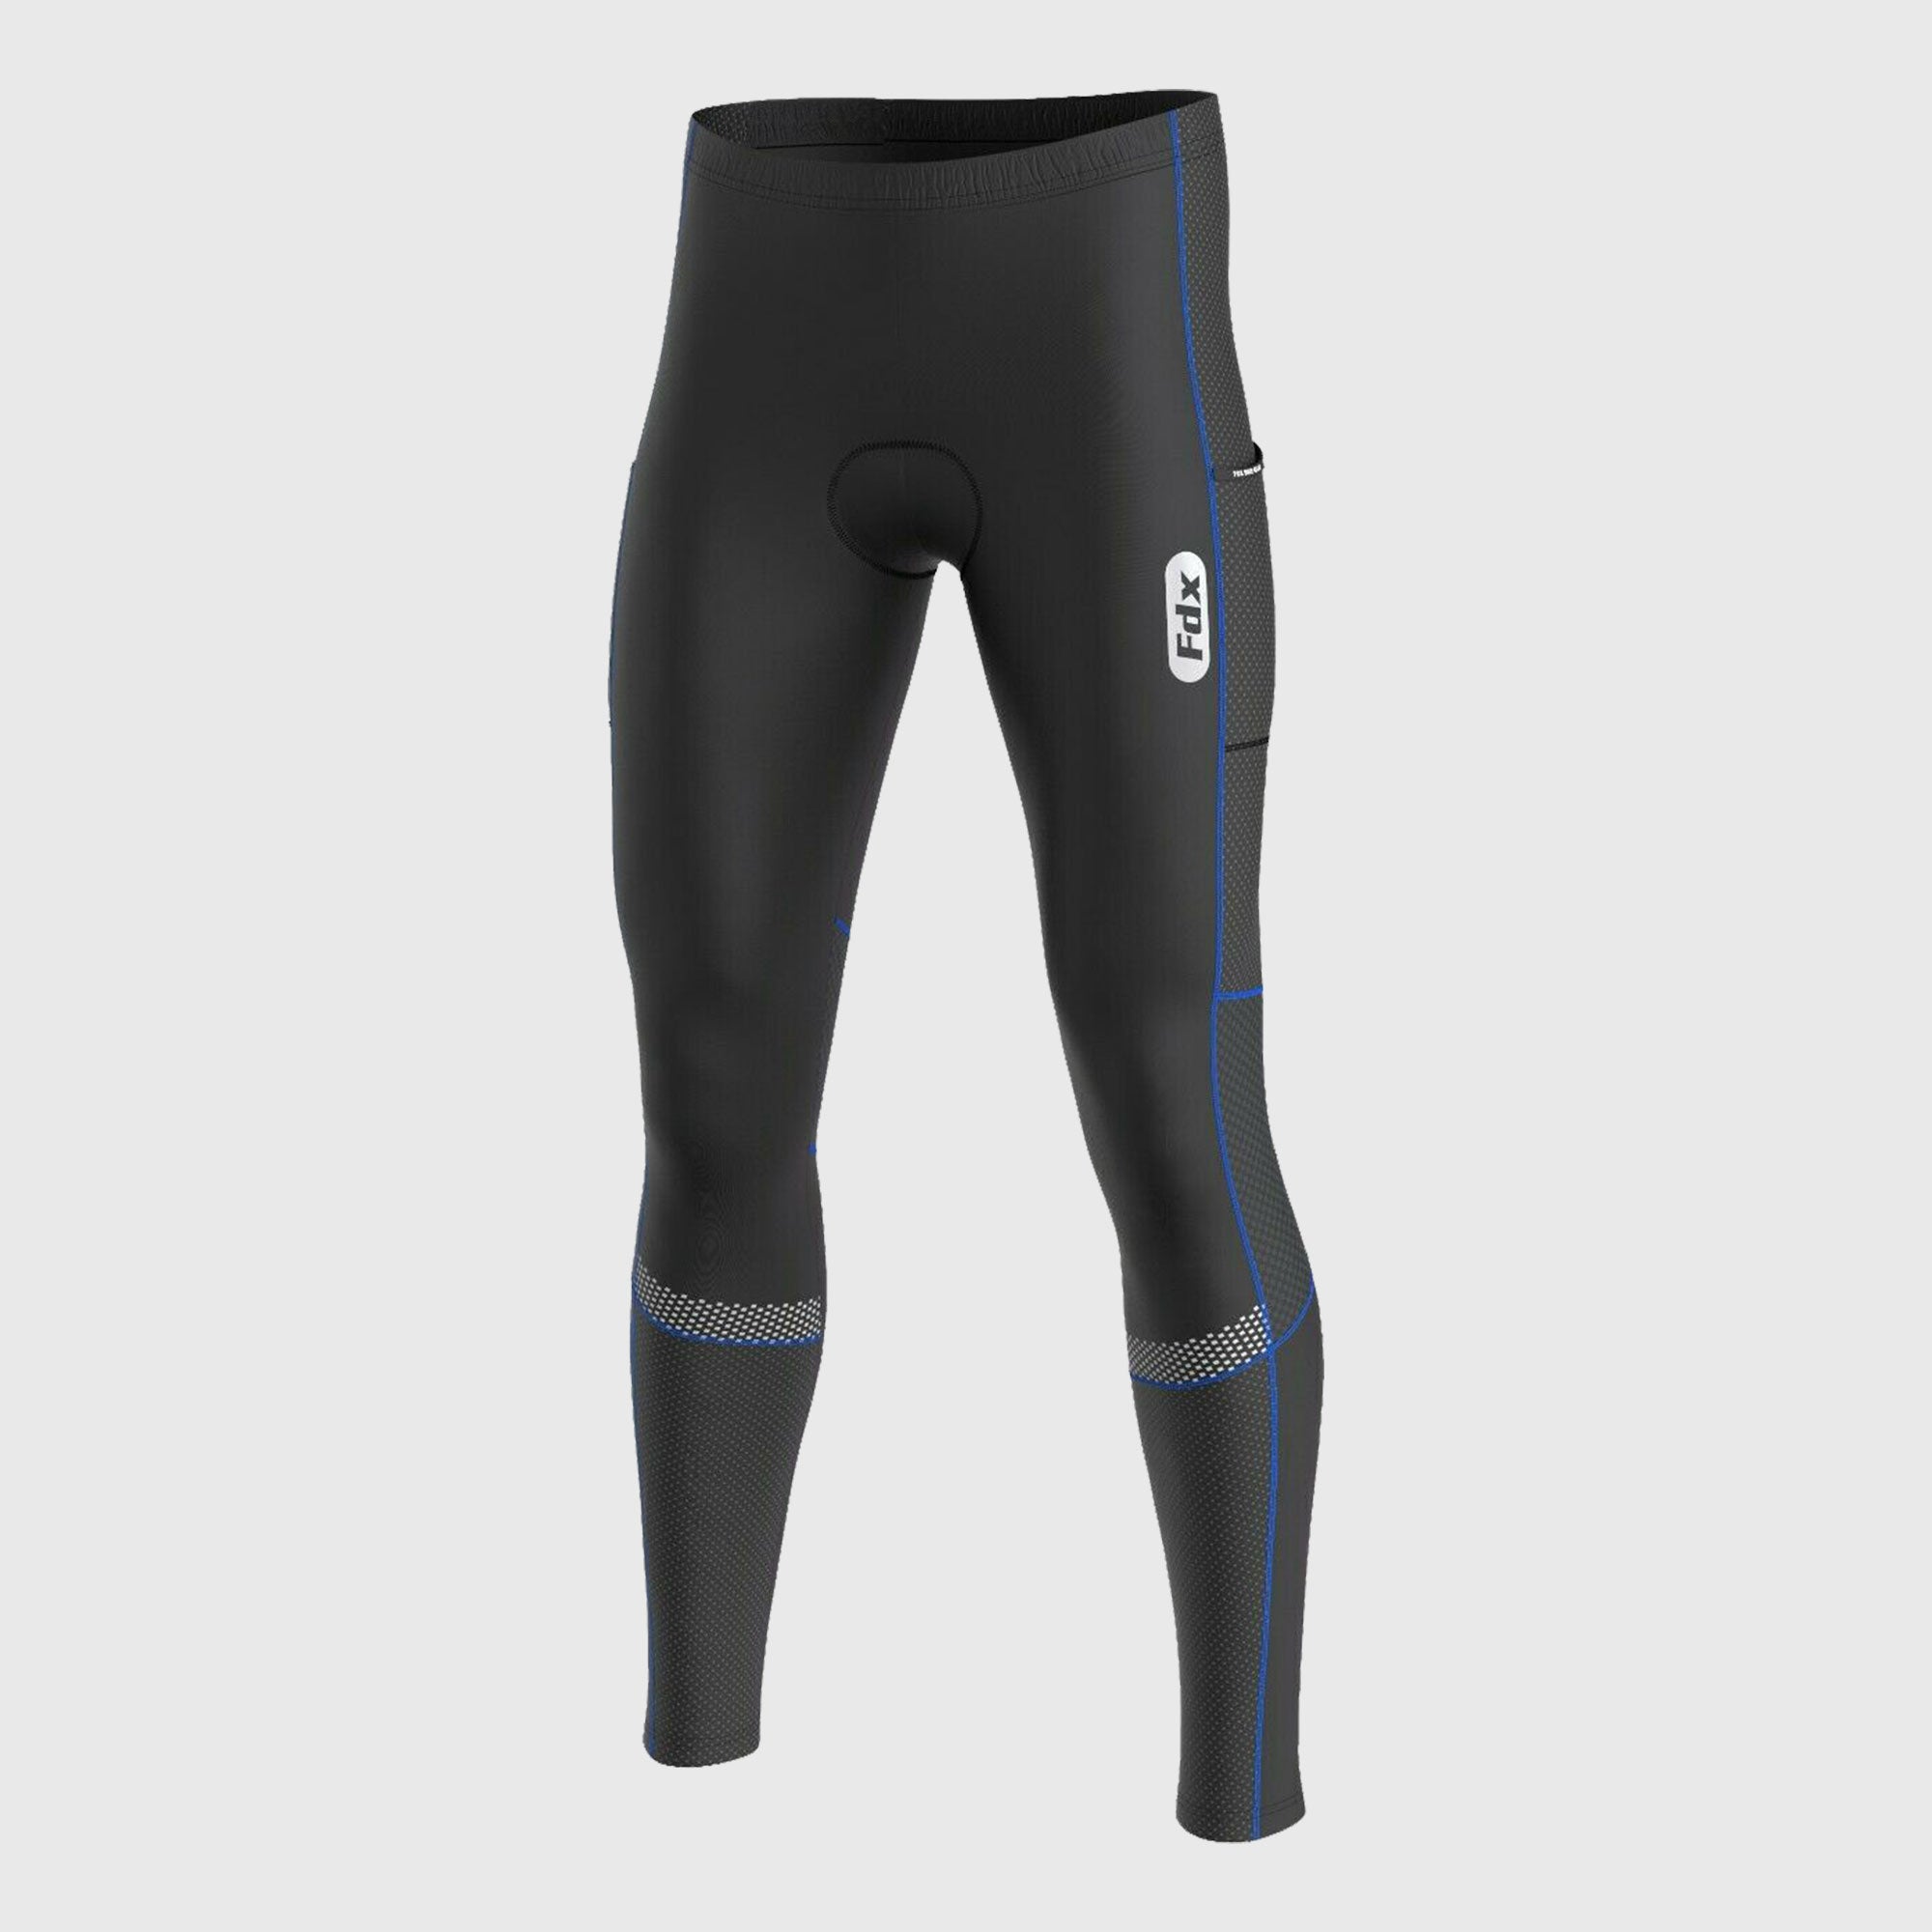 Fdx All Day Men's & Boy's Blue Thermal Padded Cycling Tights